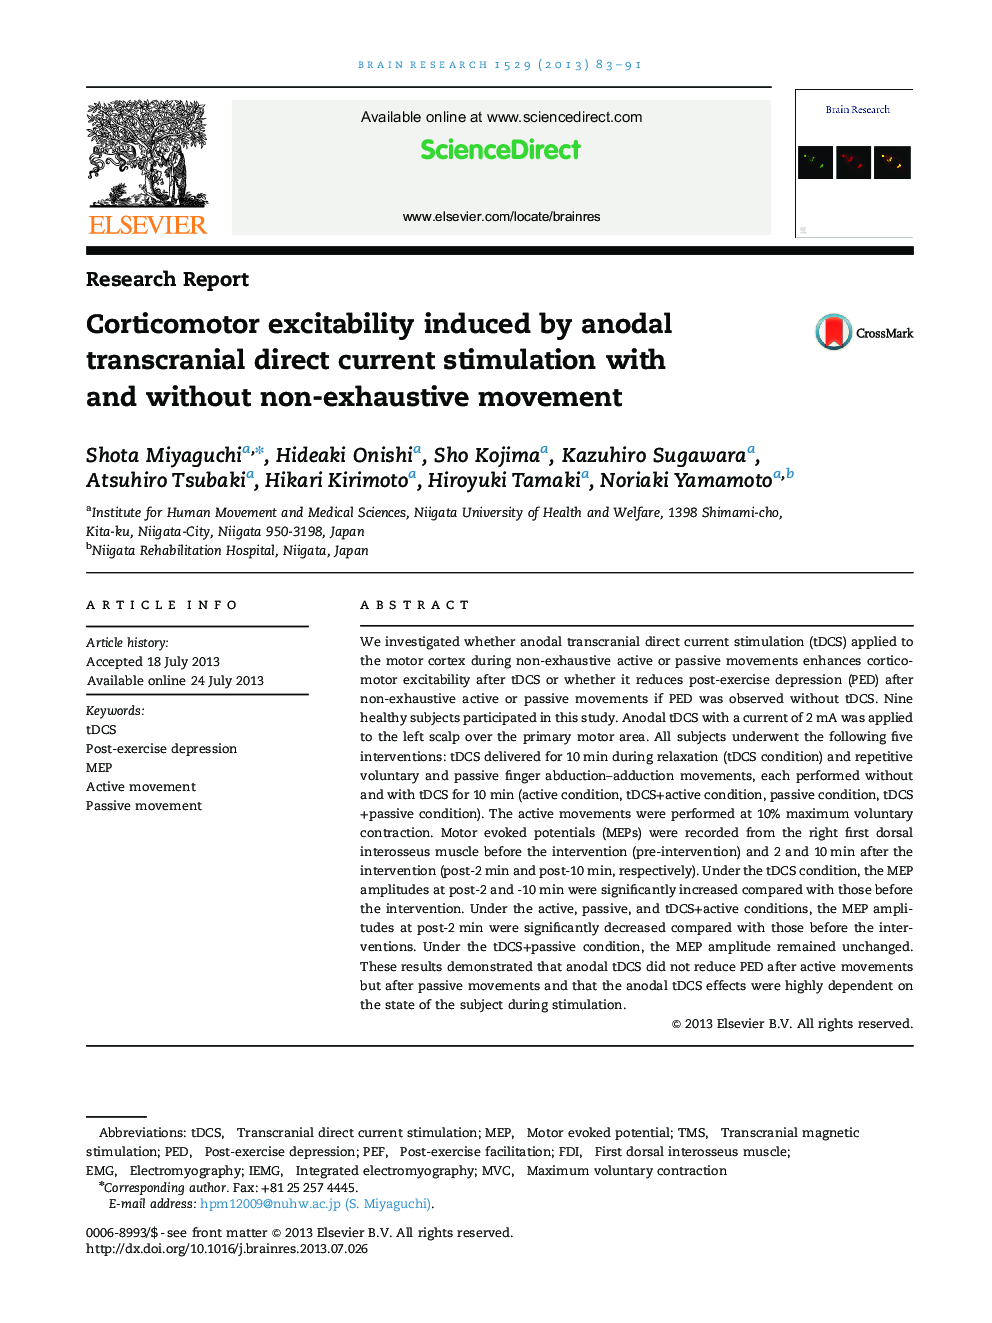 Research ReportCorticomotor excitability induced by anodal transcranial direct current stimulation with and without non-exhaustive movement